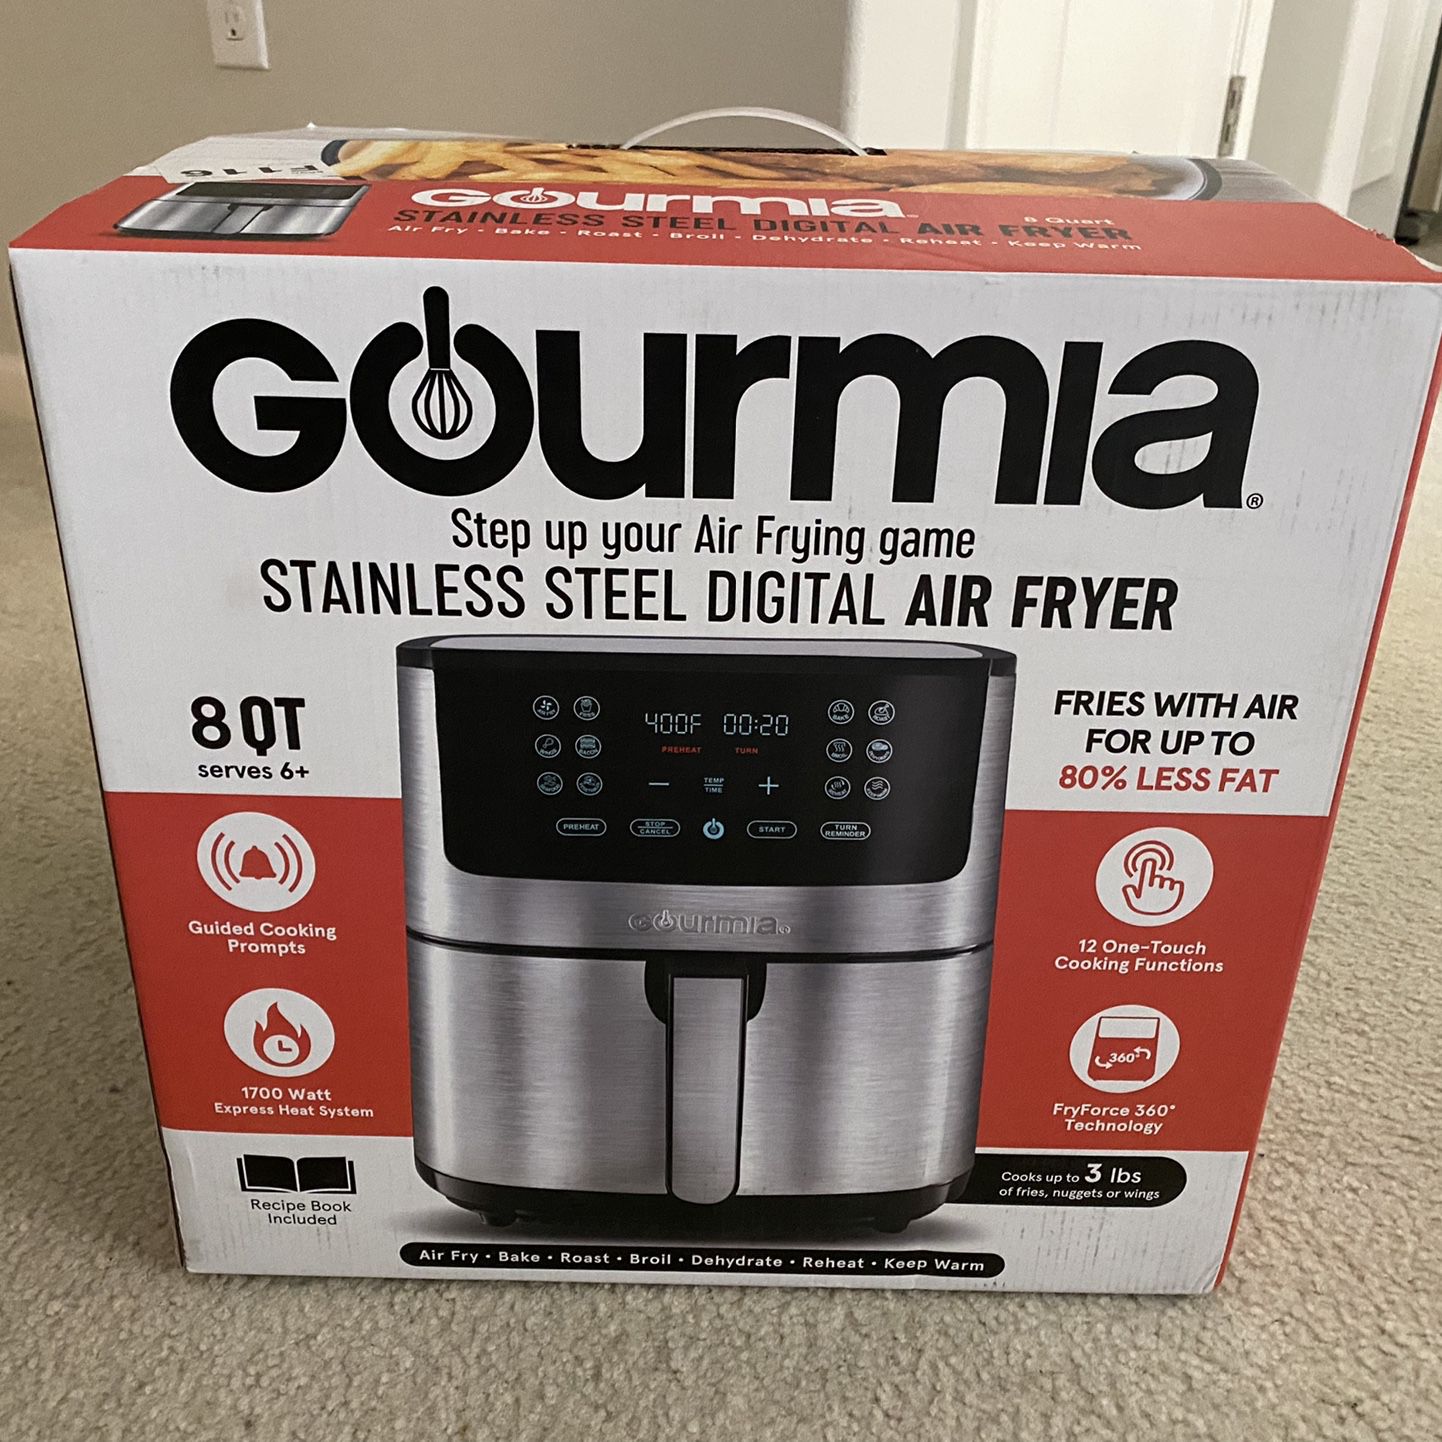 Gourmia 8 Qt Digital Air Fryer with 12-One Touch Presets